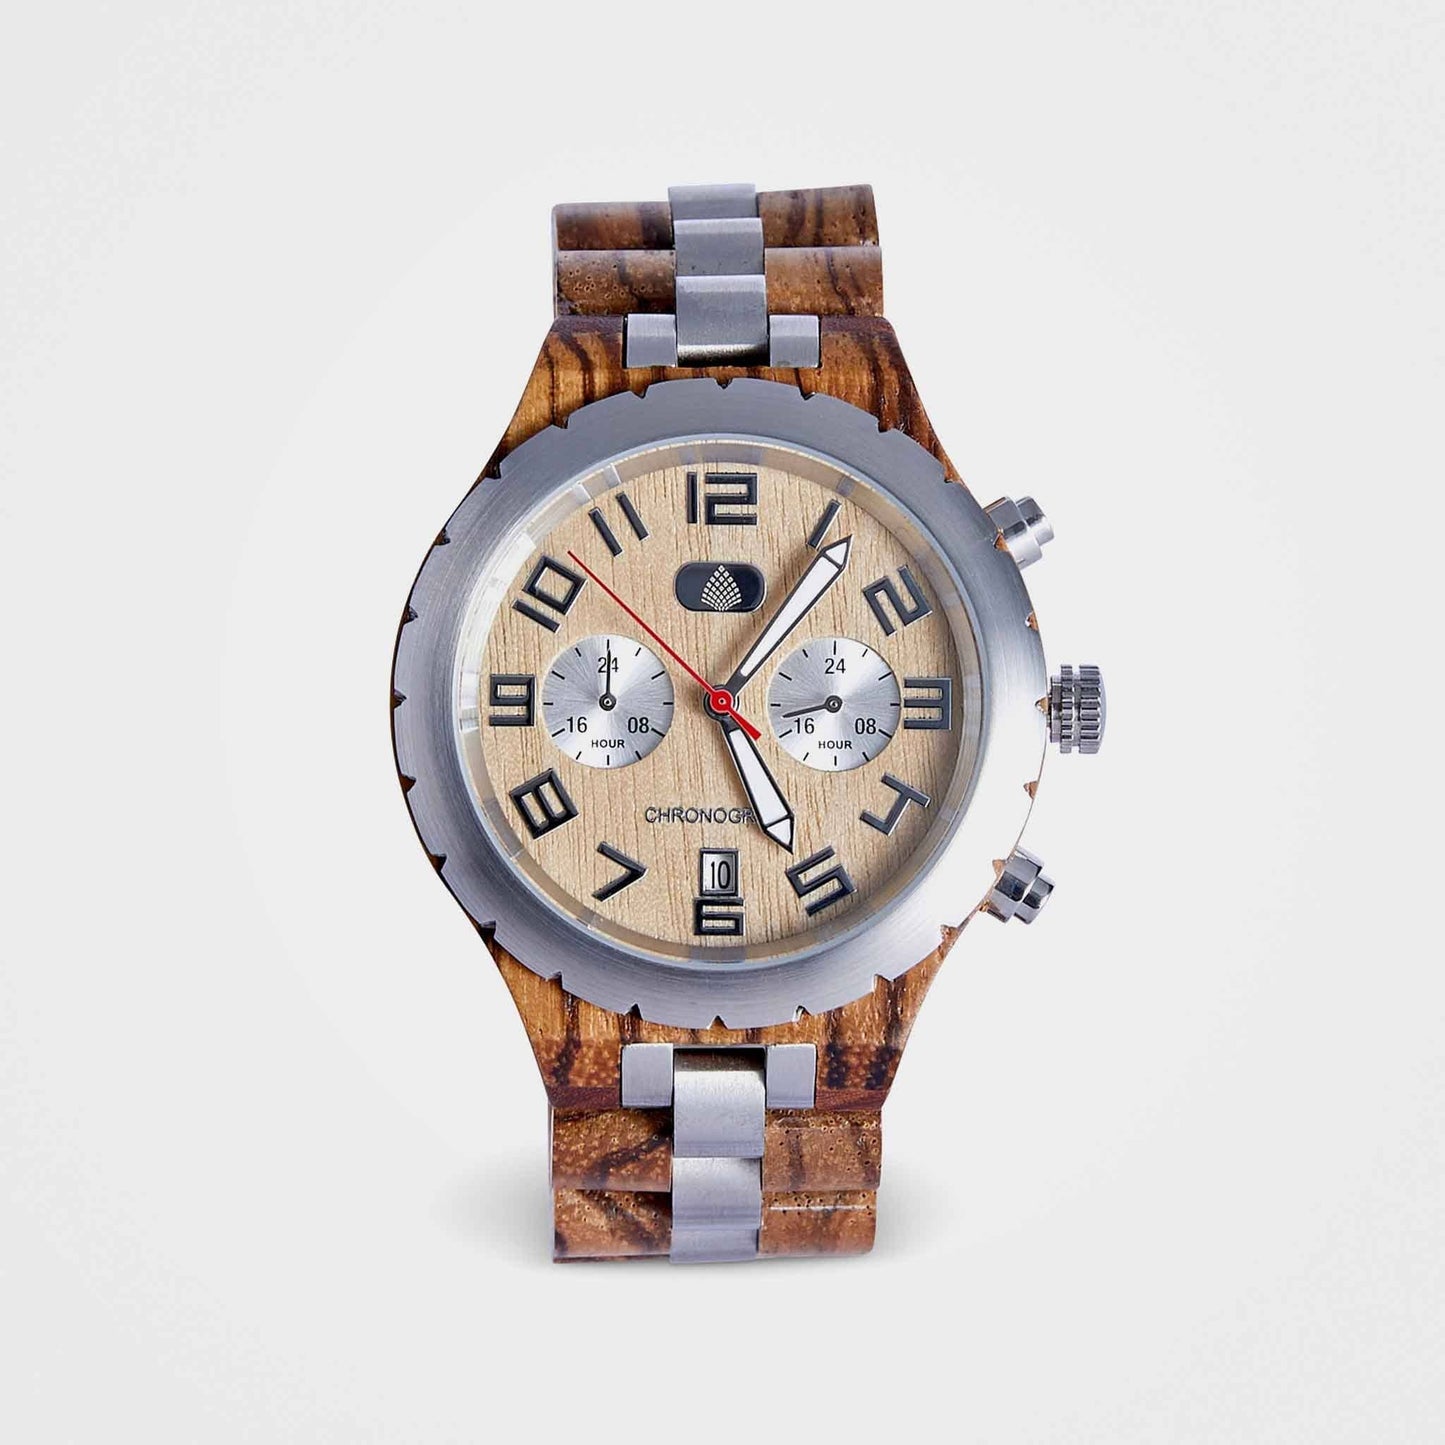 Chronograph Wooden Watch For Men: The Sandalwood